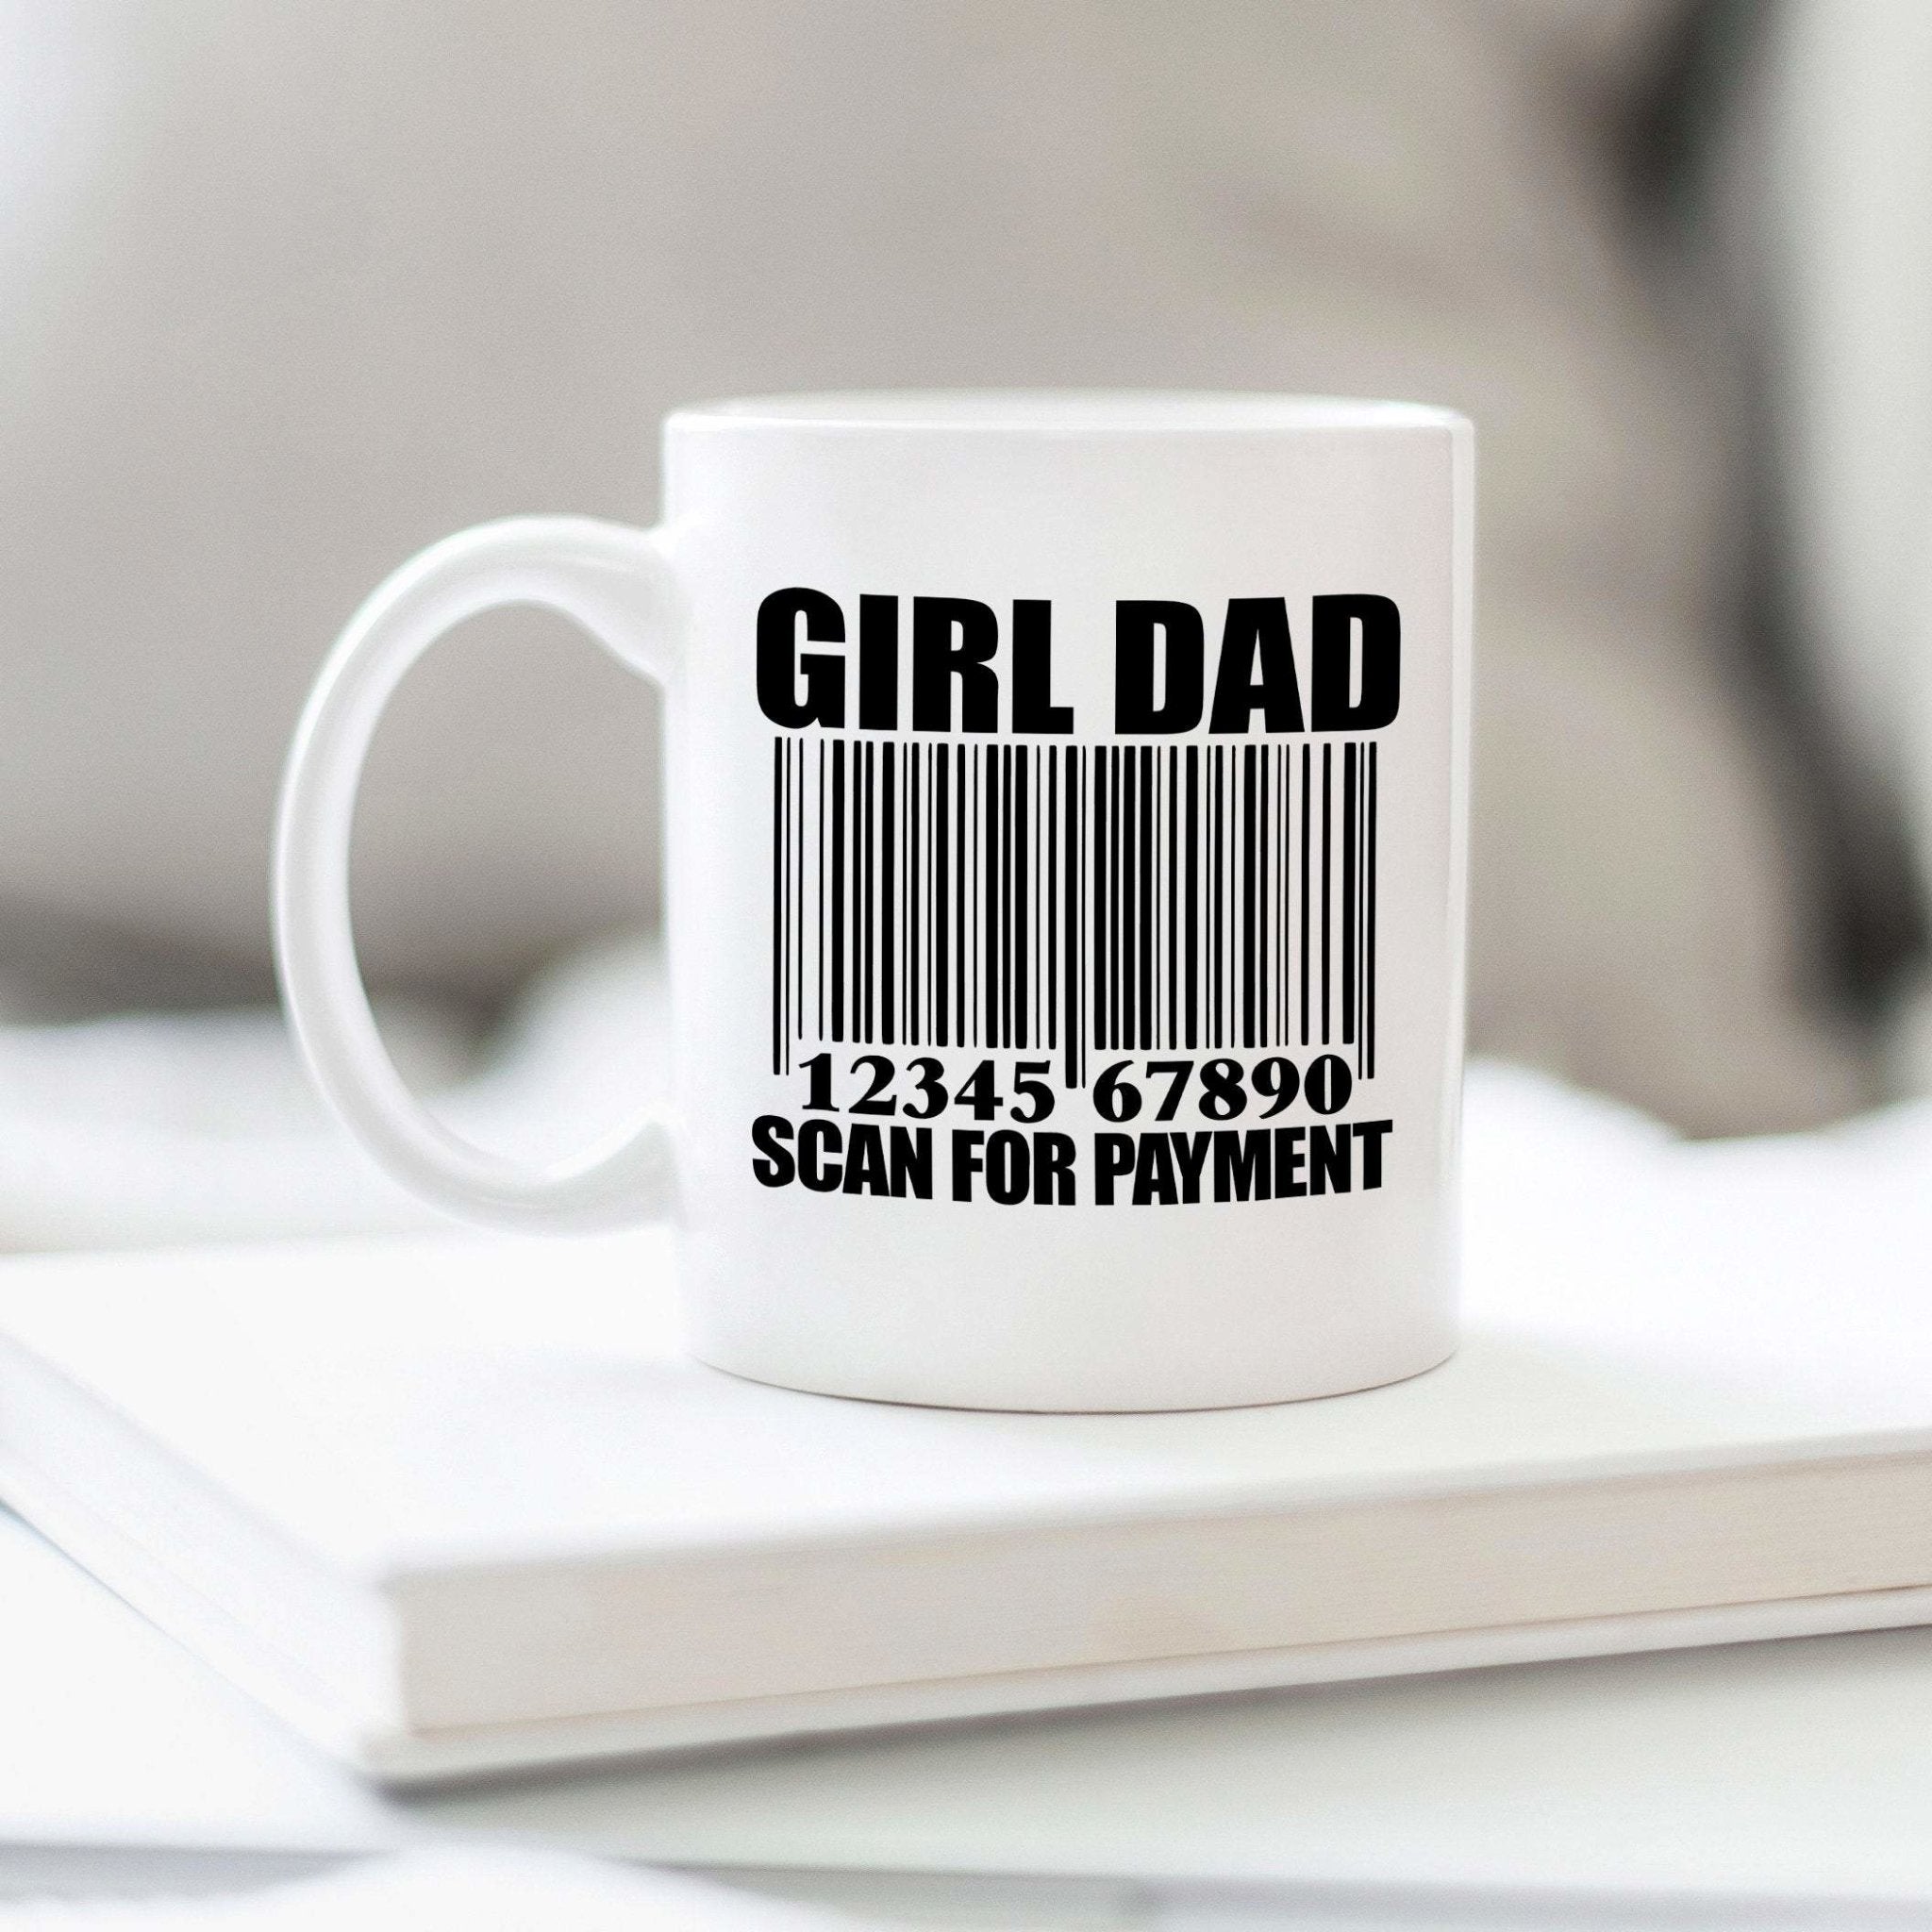 Personalized Gifts for Men, Coffee Mug for Dad, Monogram Coffee